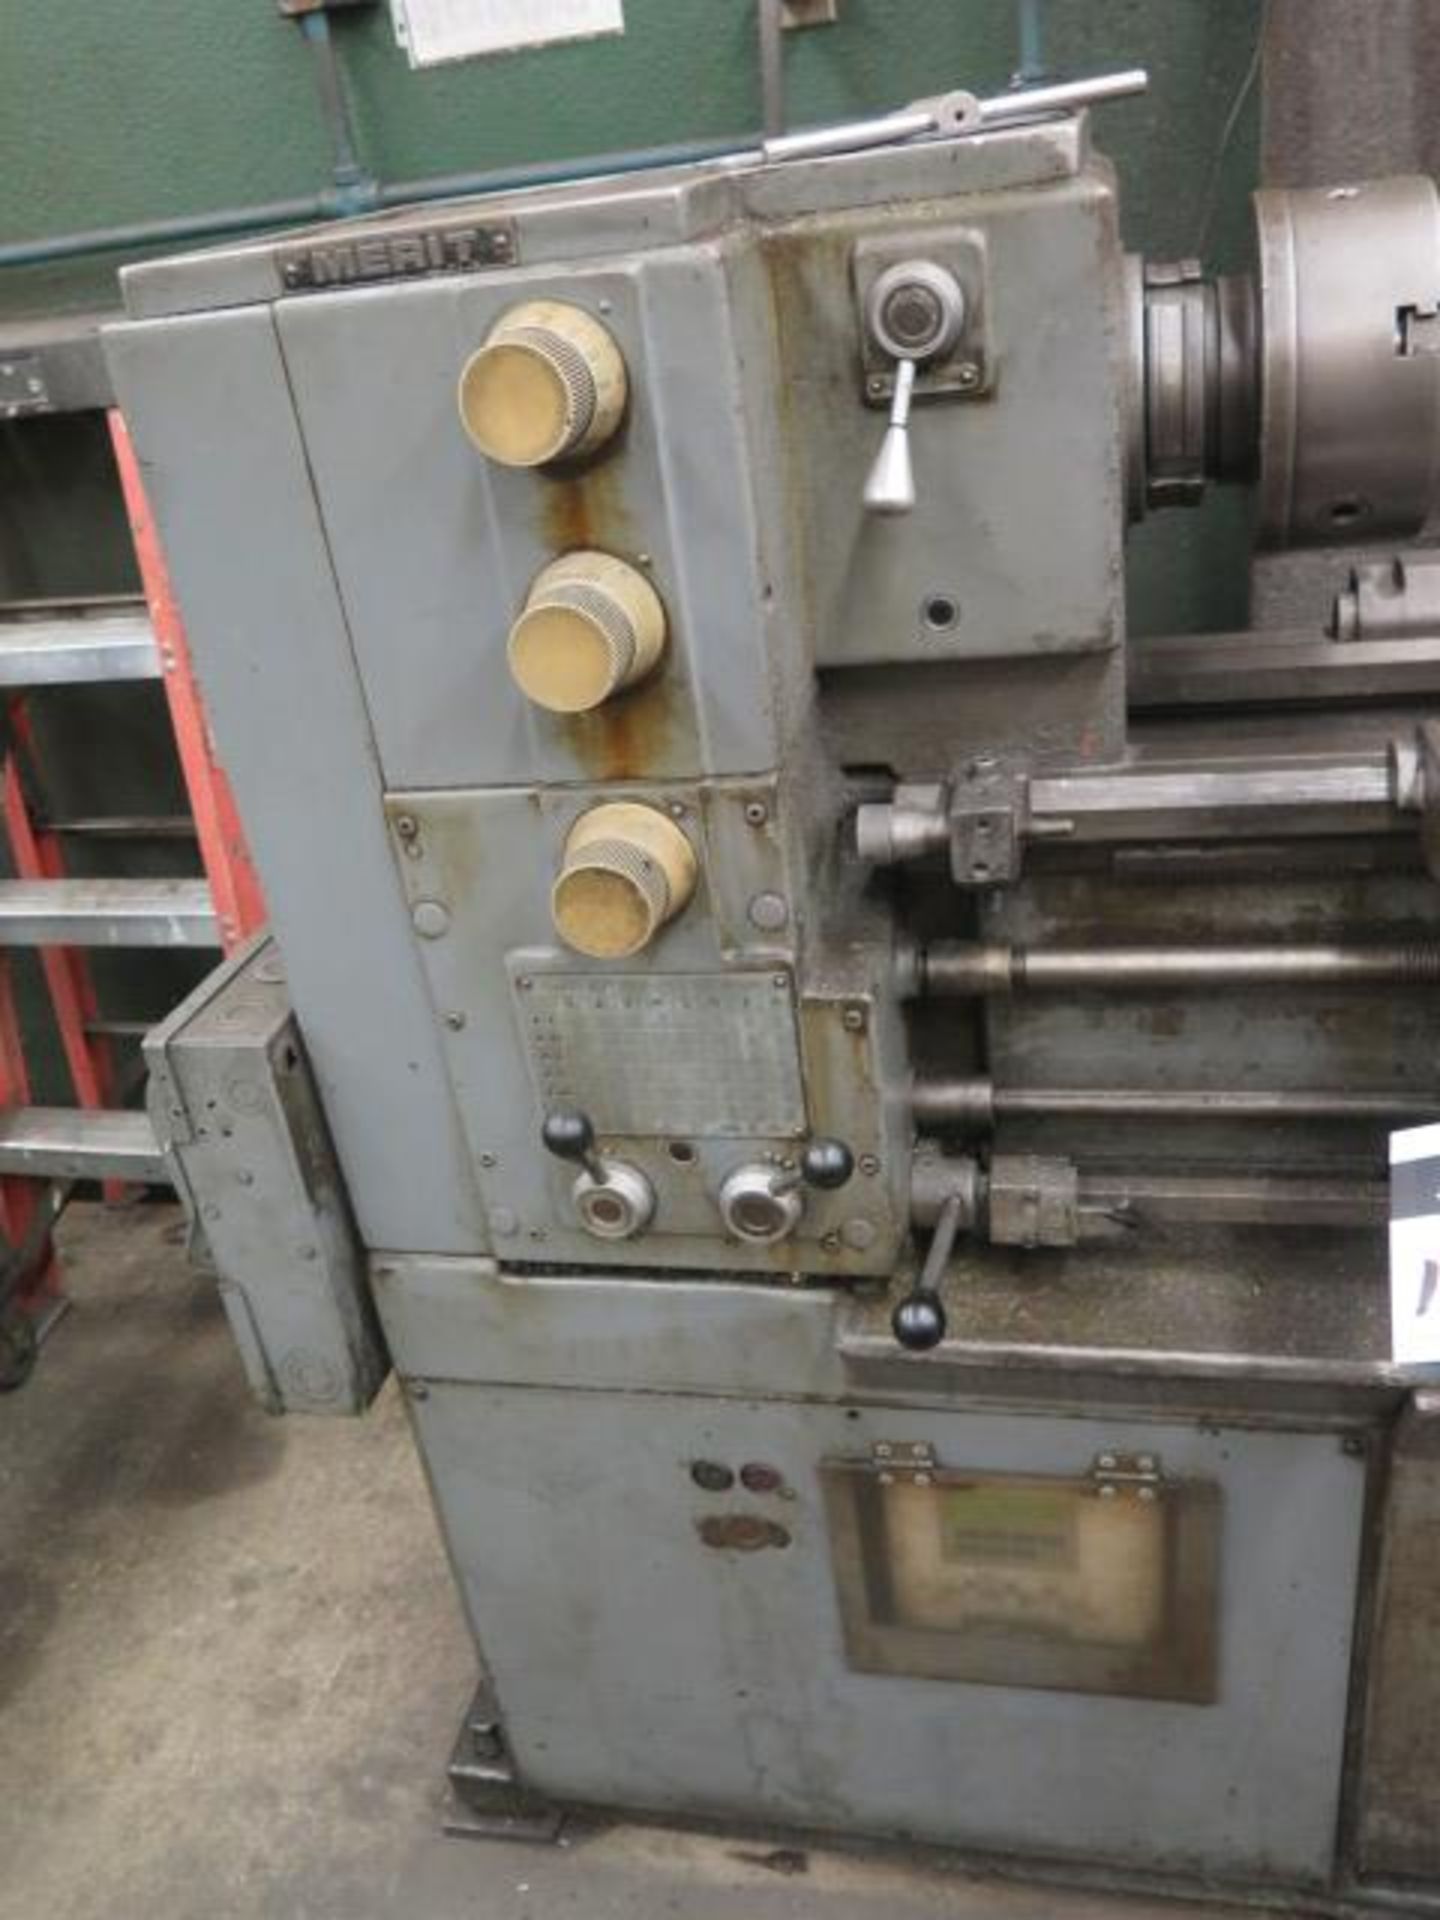 Merit 15" x 42" Lathe s/n 48752 w/ 30-1800 RPM, Inch Threading, Tailstock, Steady Rest, SOLD AS IS - Image 4 of 10